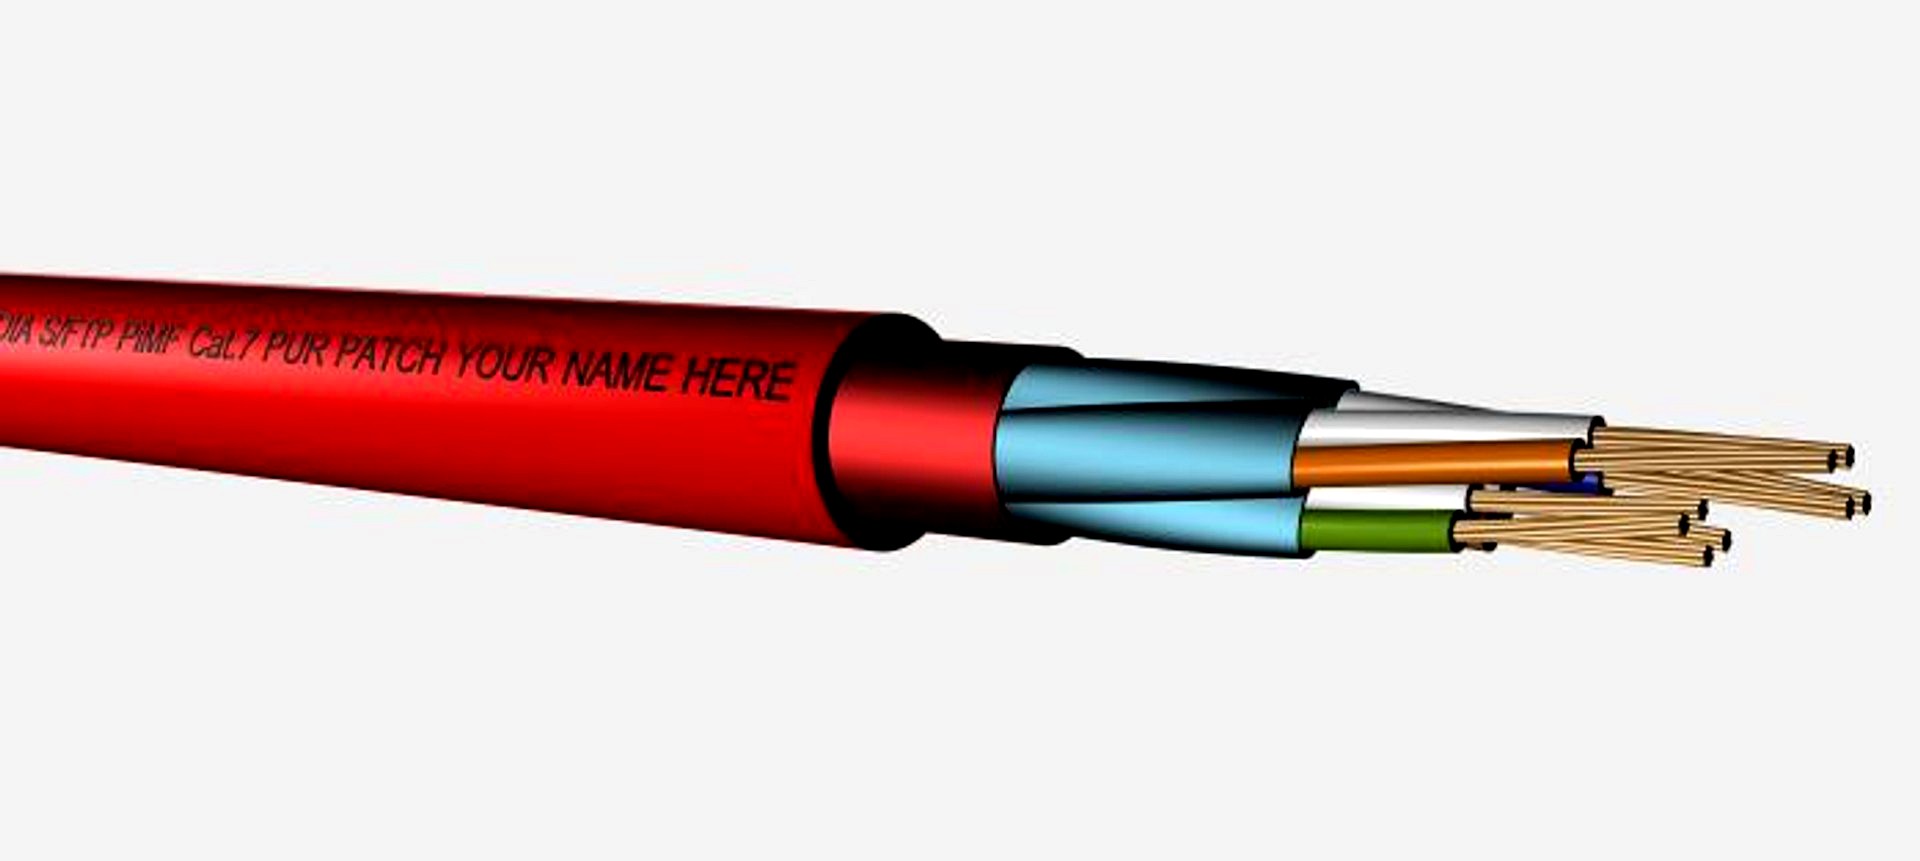 S-FTP PiMF Cat7 PUR PATCH FIRE RESITANT SIGNAL CABLE